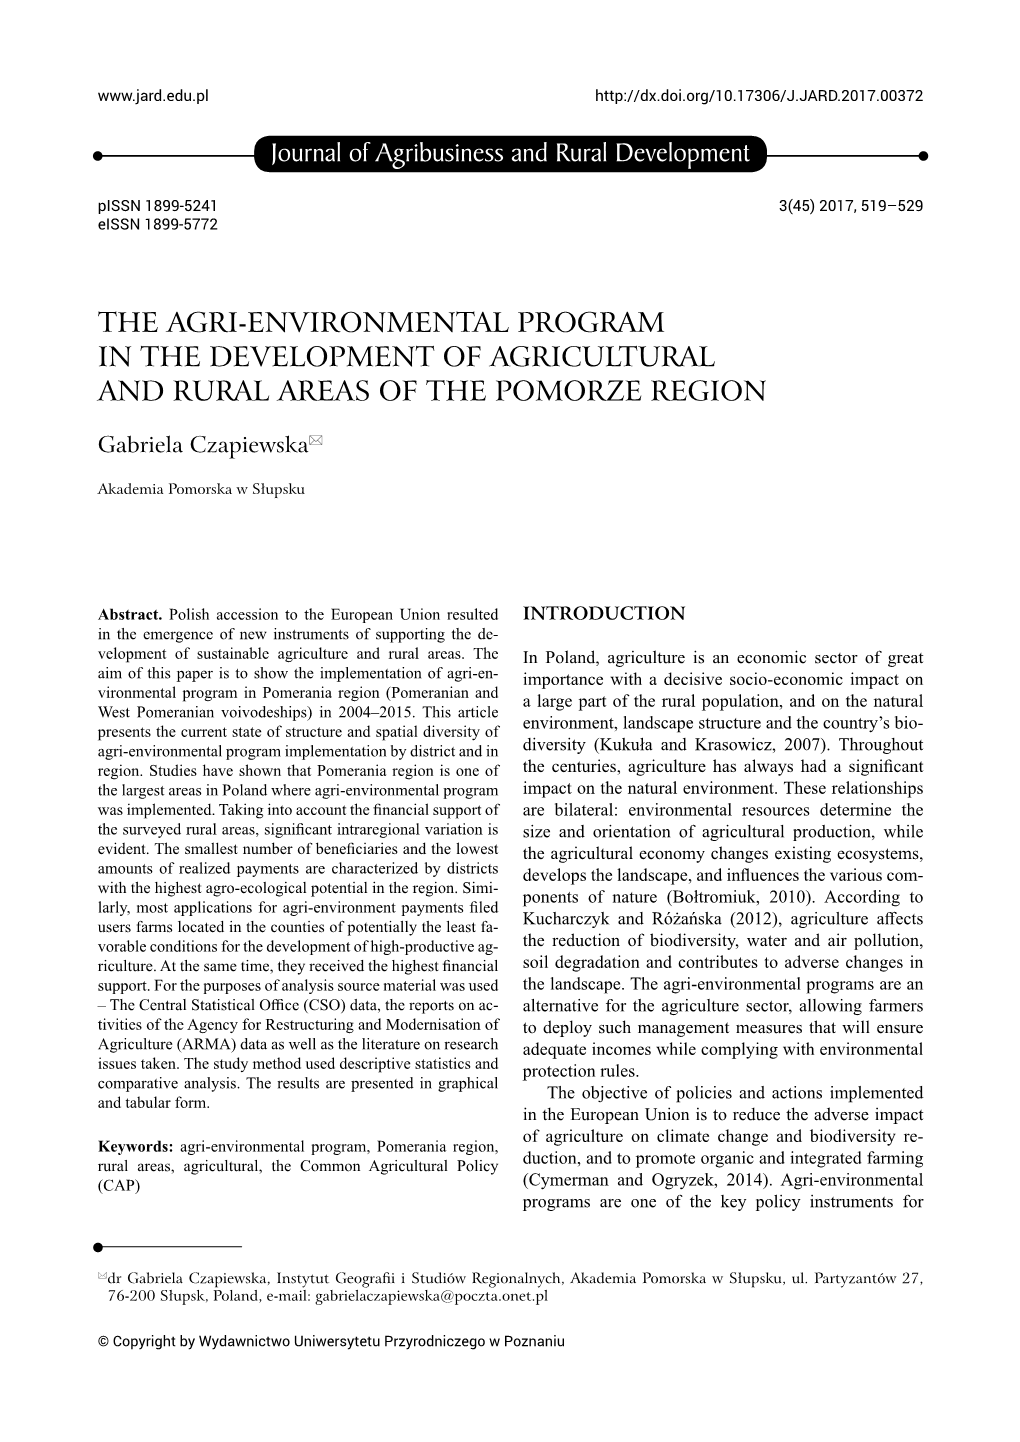 Journal of Agribusiness and Rural Development the AGRI